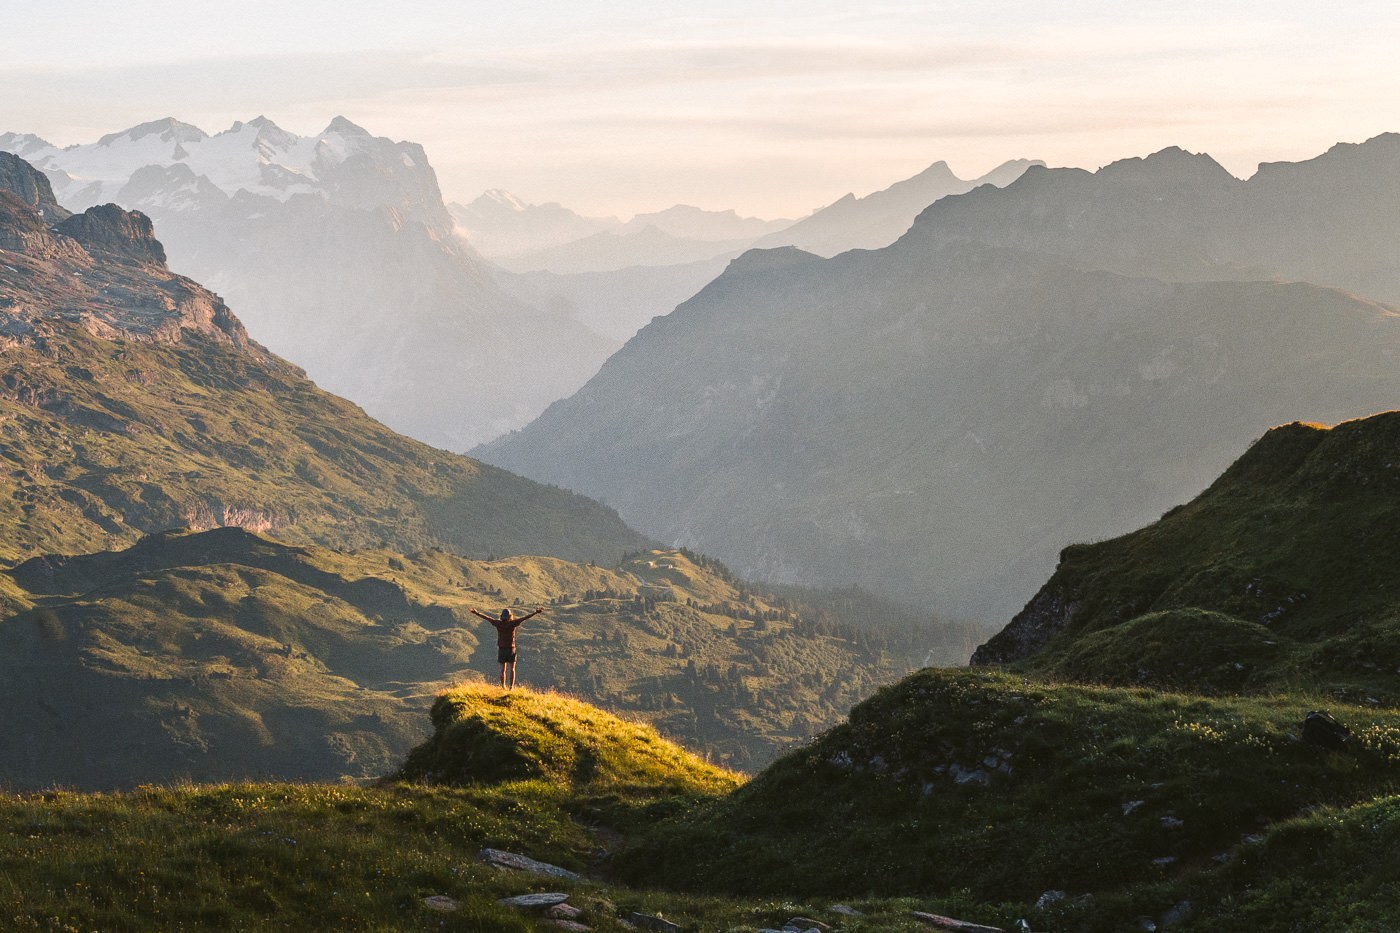 5 AWESOME HIKES IN ENGELBERG, SWITZERLAND